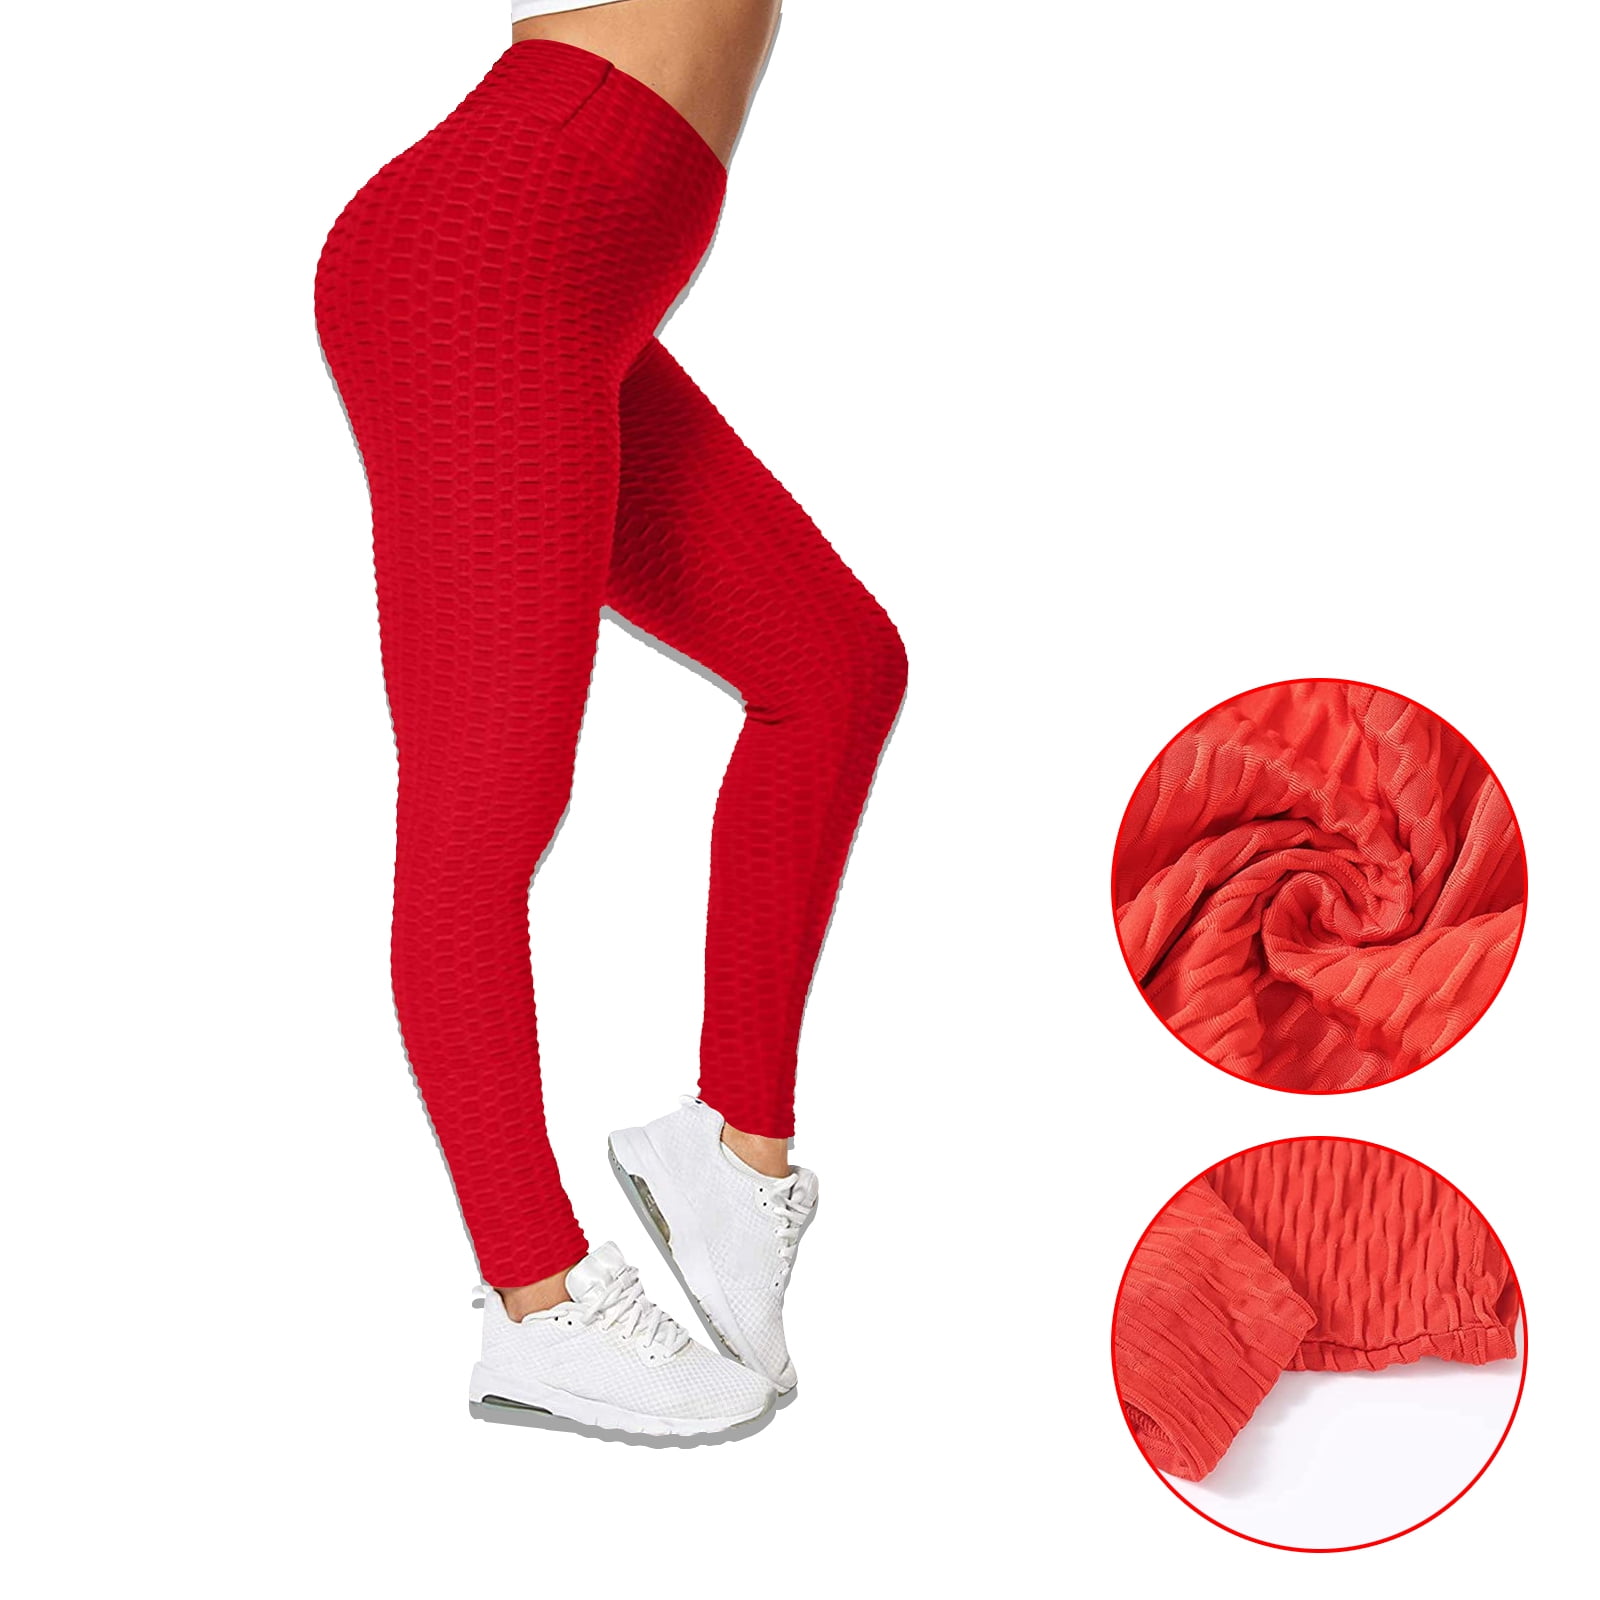 so butt lifting leggings are a thing now?? use my code anju77